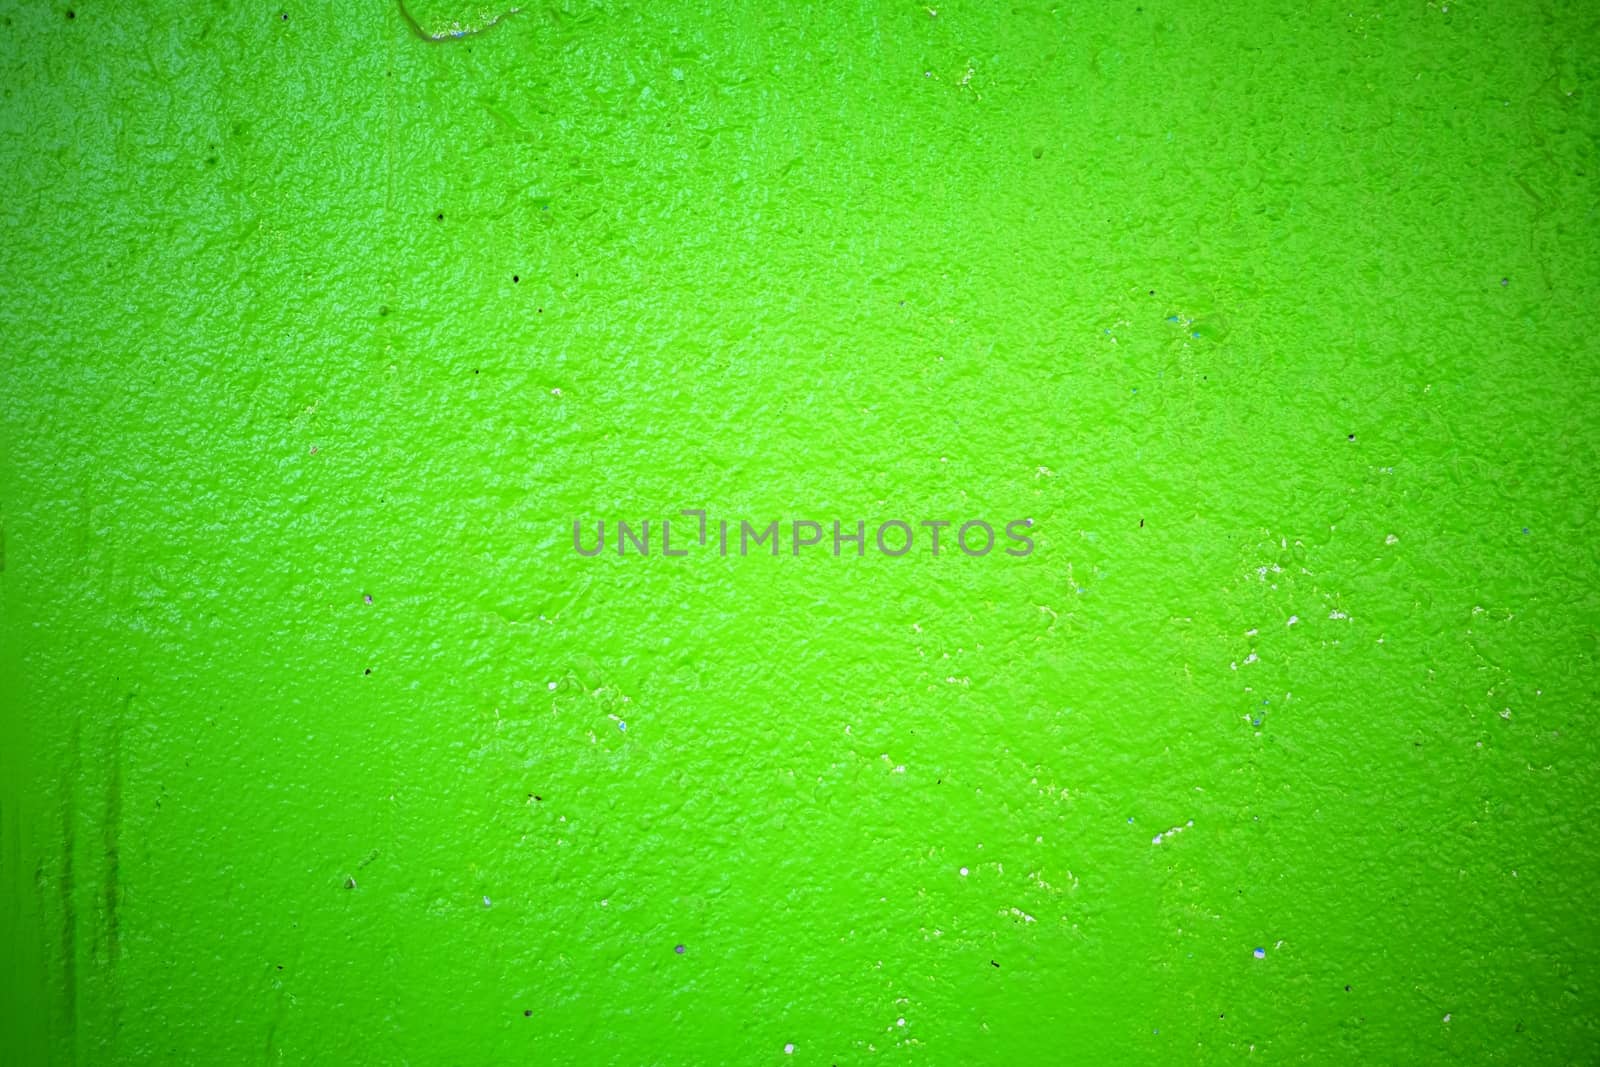 Old Green Painted Concrete Texture Wall.